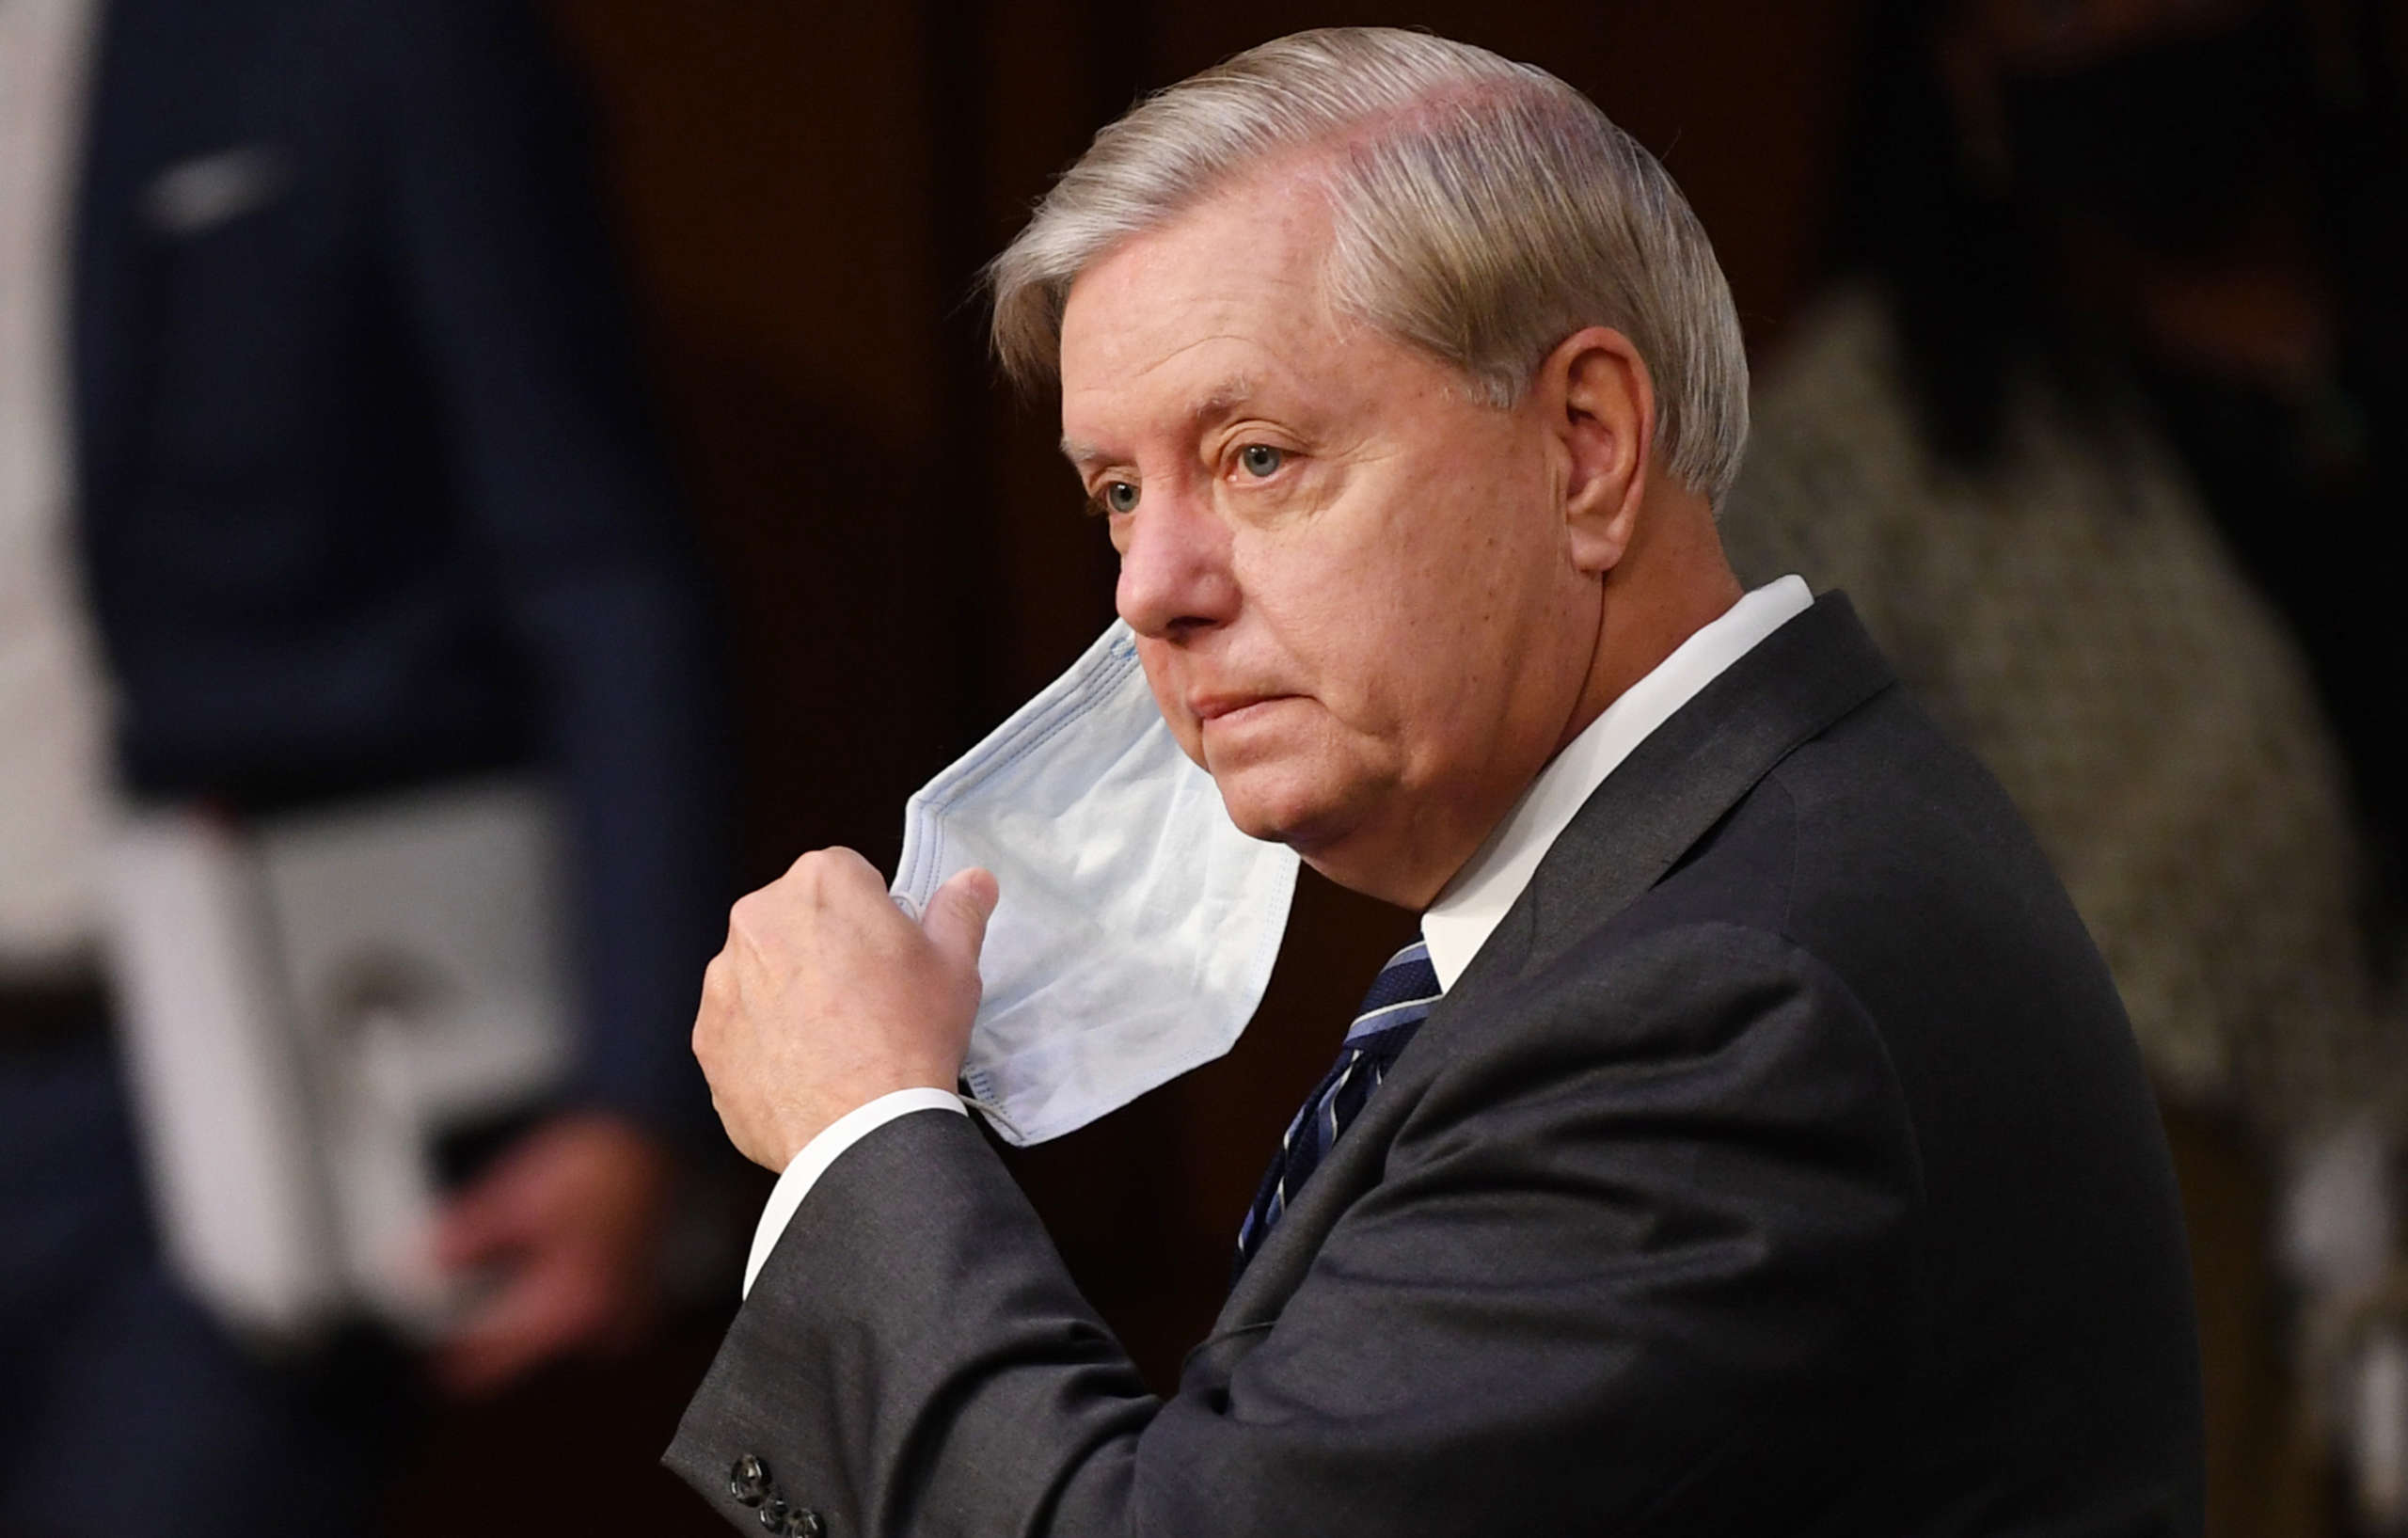 Lindsey Graham Called Out For Illegal Campaign Soliciting In Senate Building